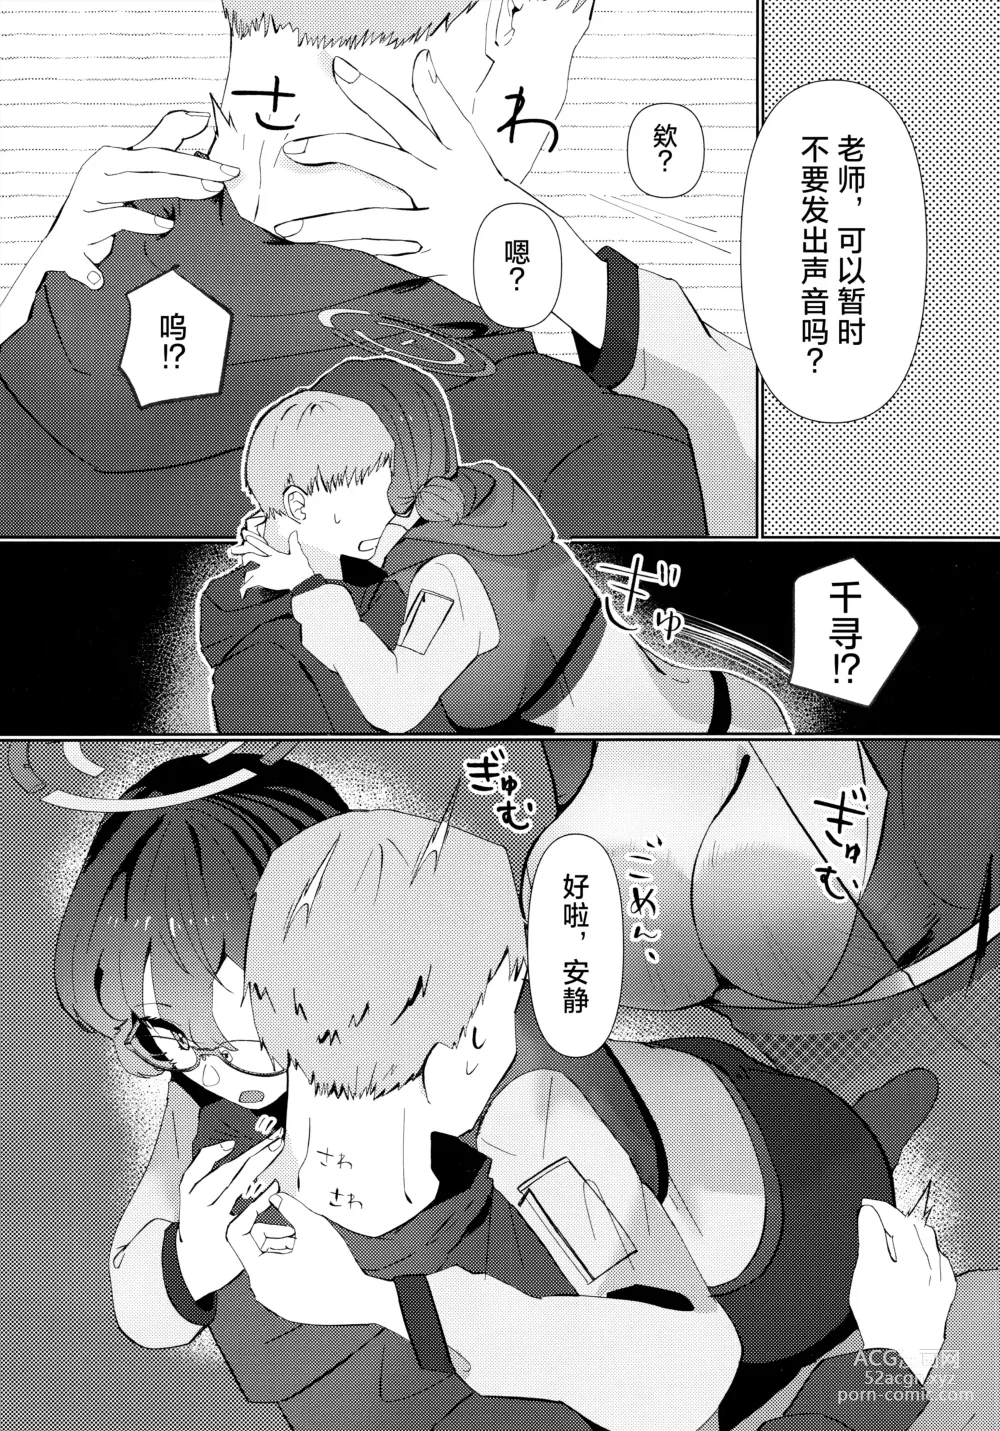 Page 5 of doujinshi 夜半时分的骇入